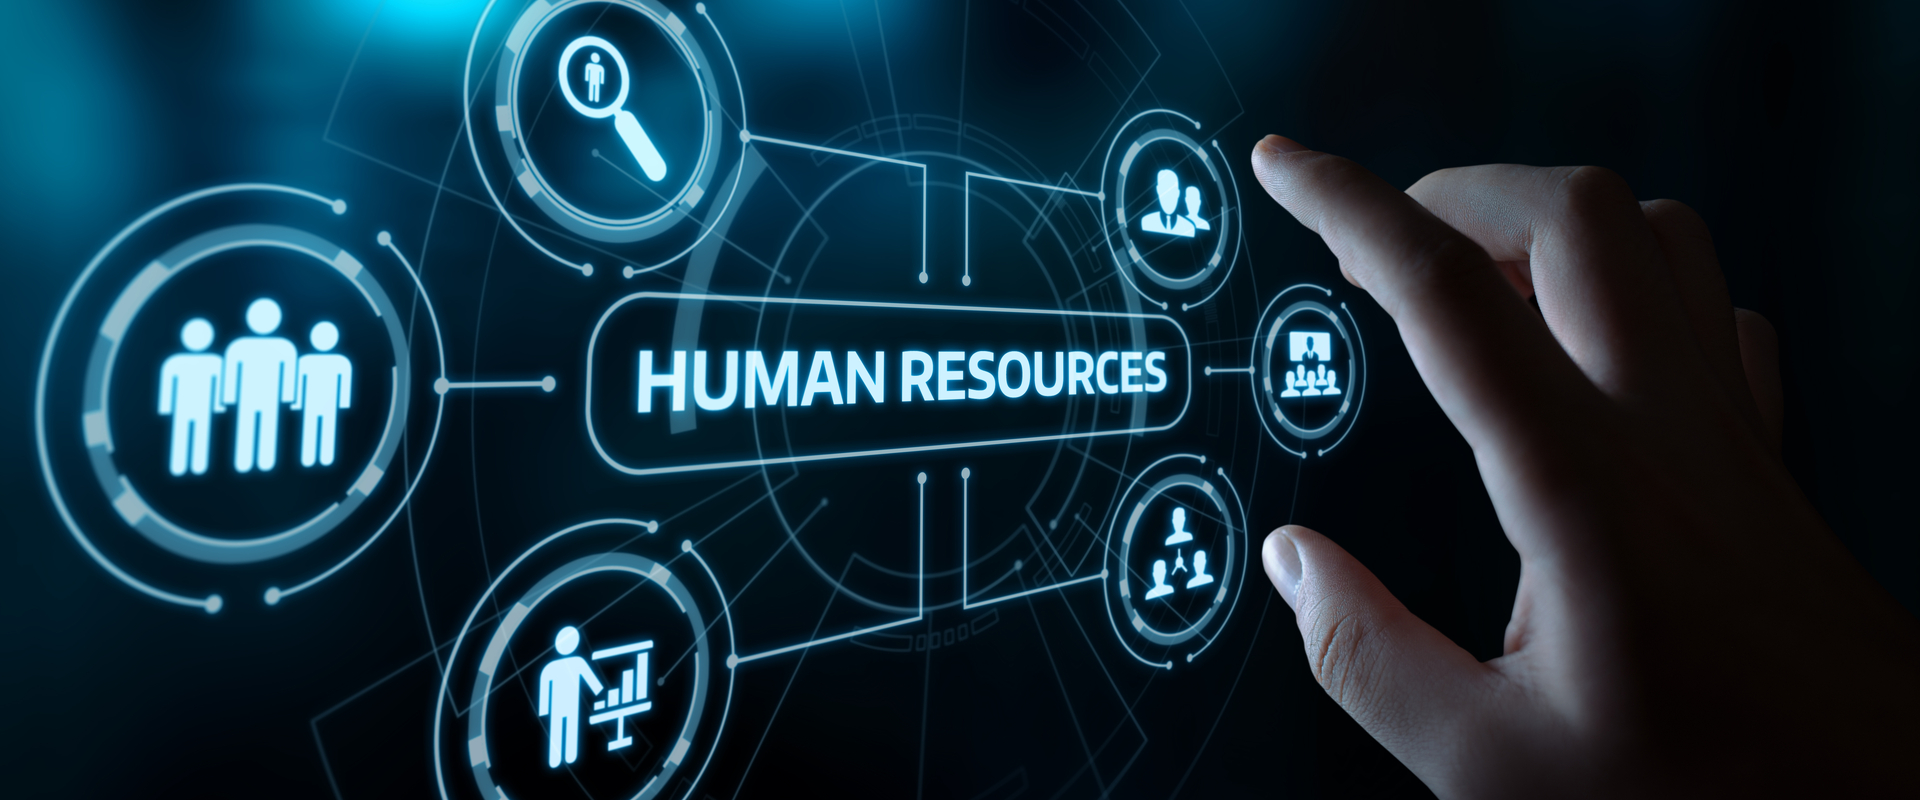 5 Critical Components of an Effective HR Management System - Chetu